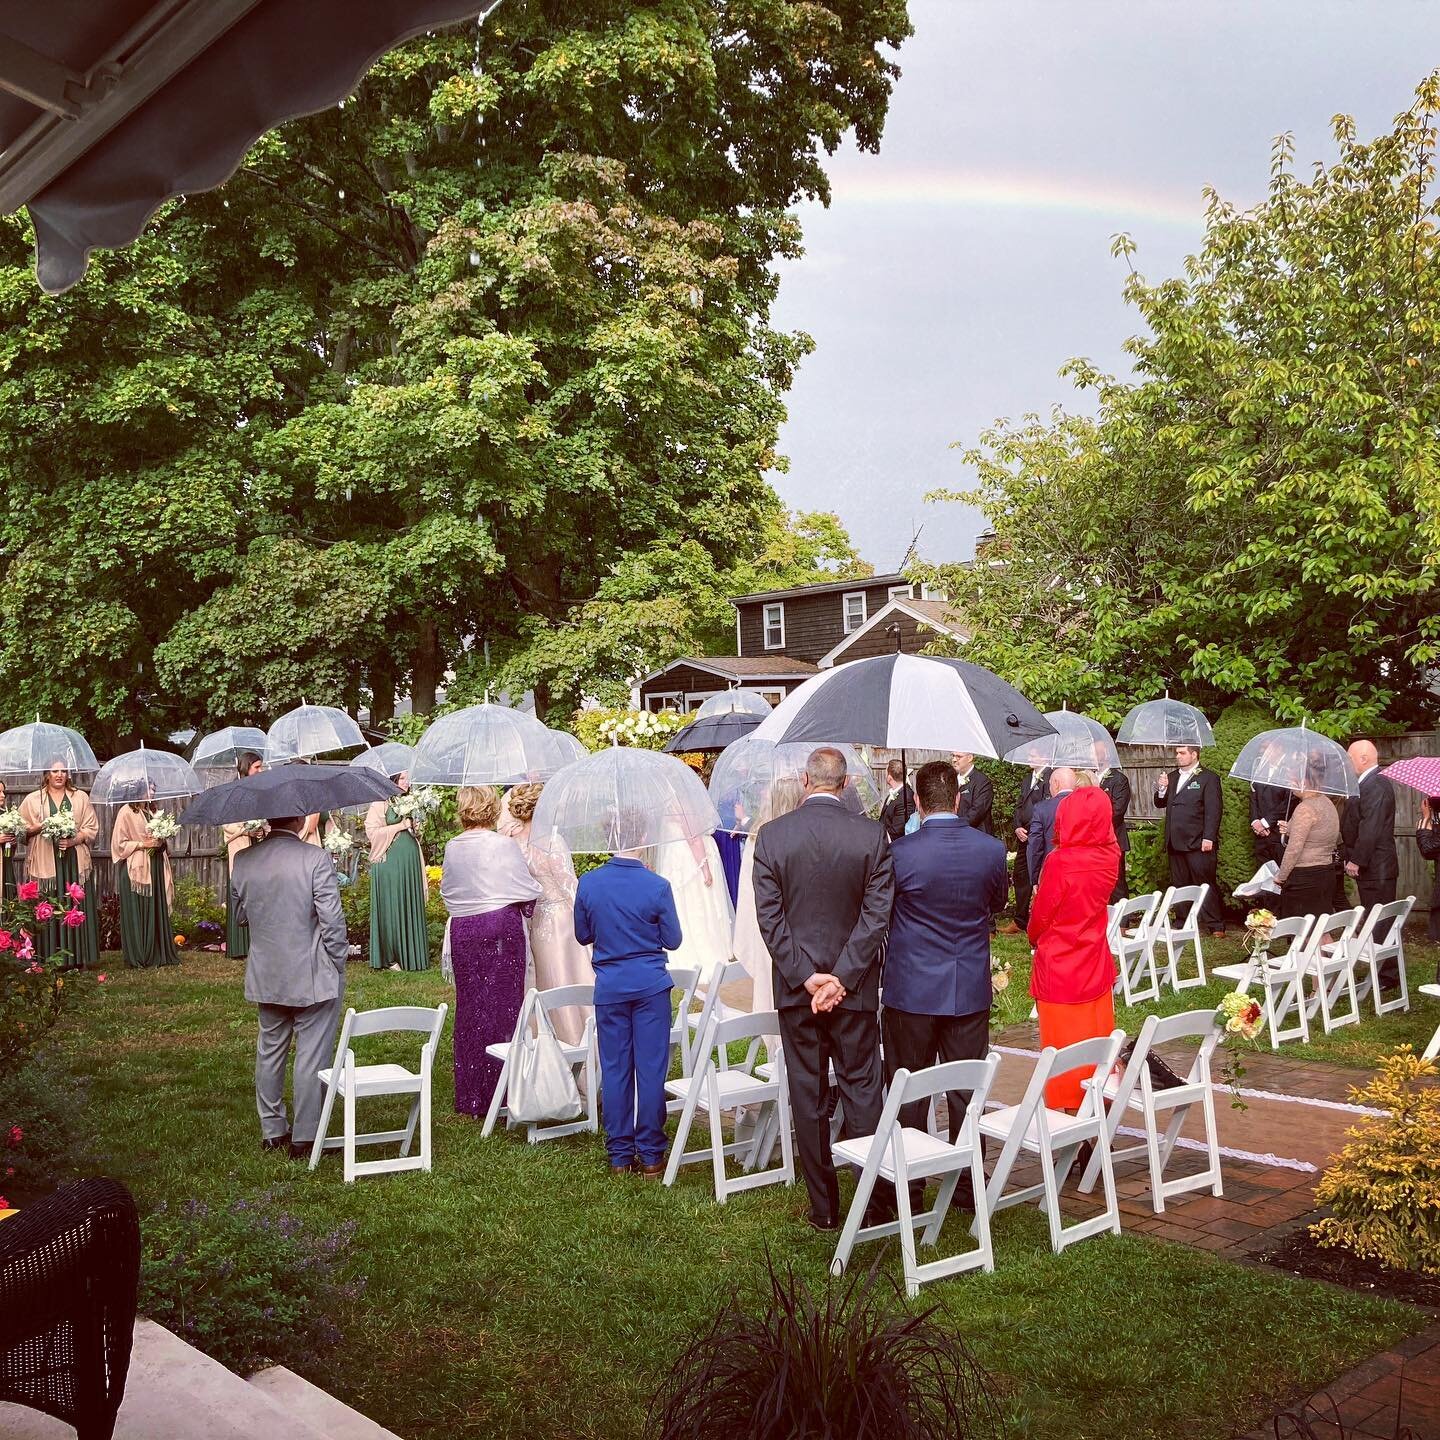 You really can&rsquo;t make up this sort of magic. 
*
It was raining on and off this afternoon. Cleared up a bit, processional began, started raining again. ☂ A few minutes in to the ceremony, the sun came out and brought this stunning rainbow with i